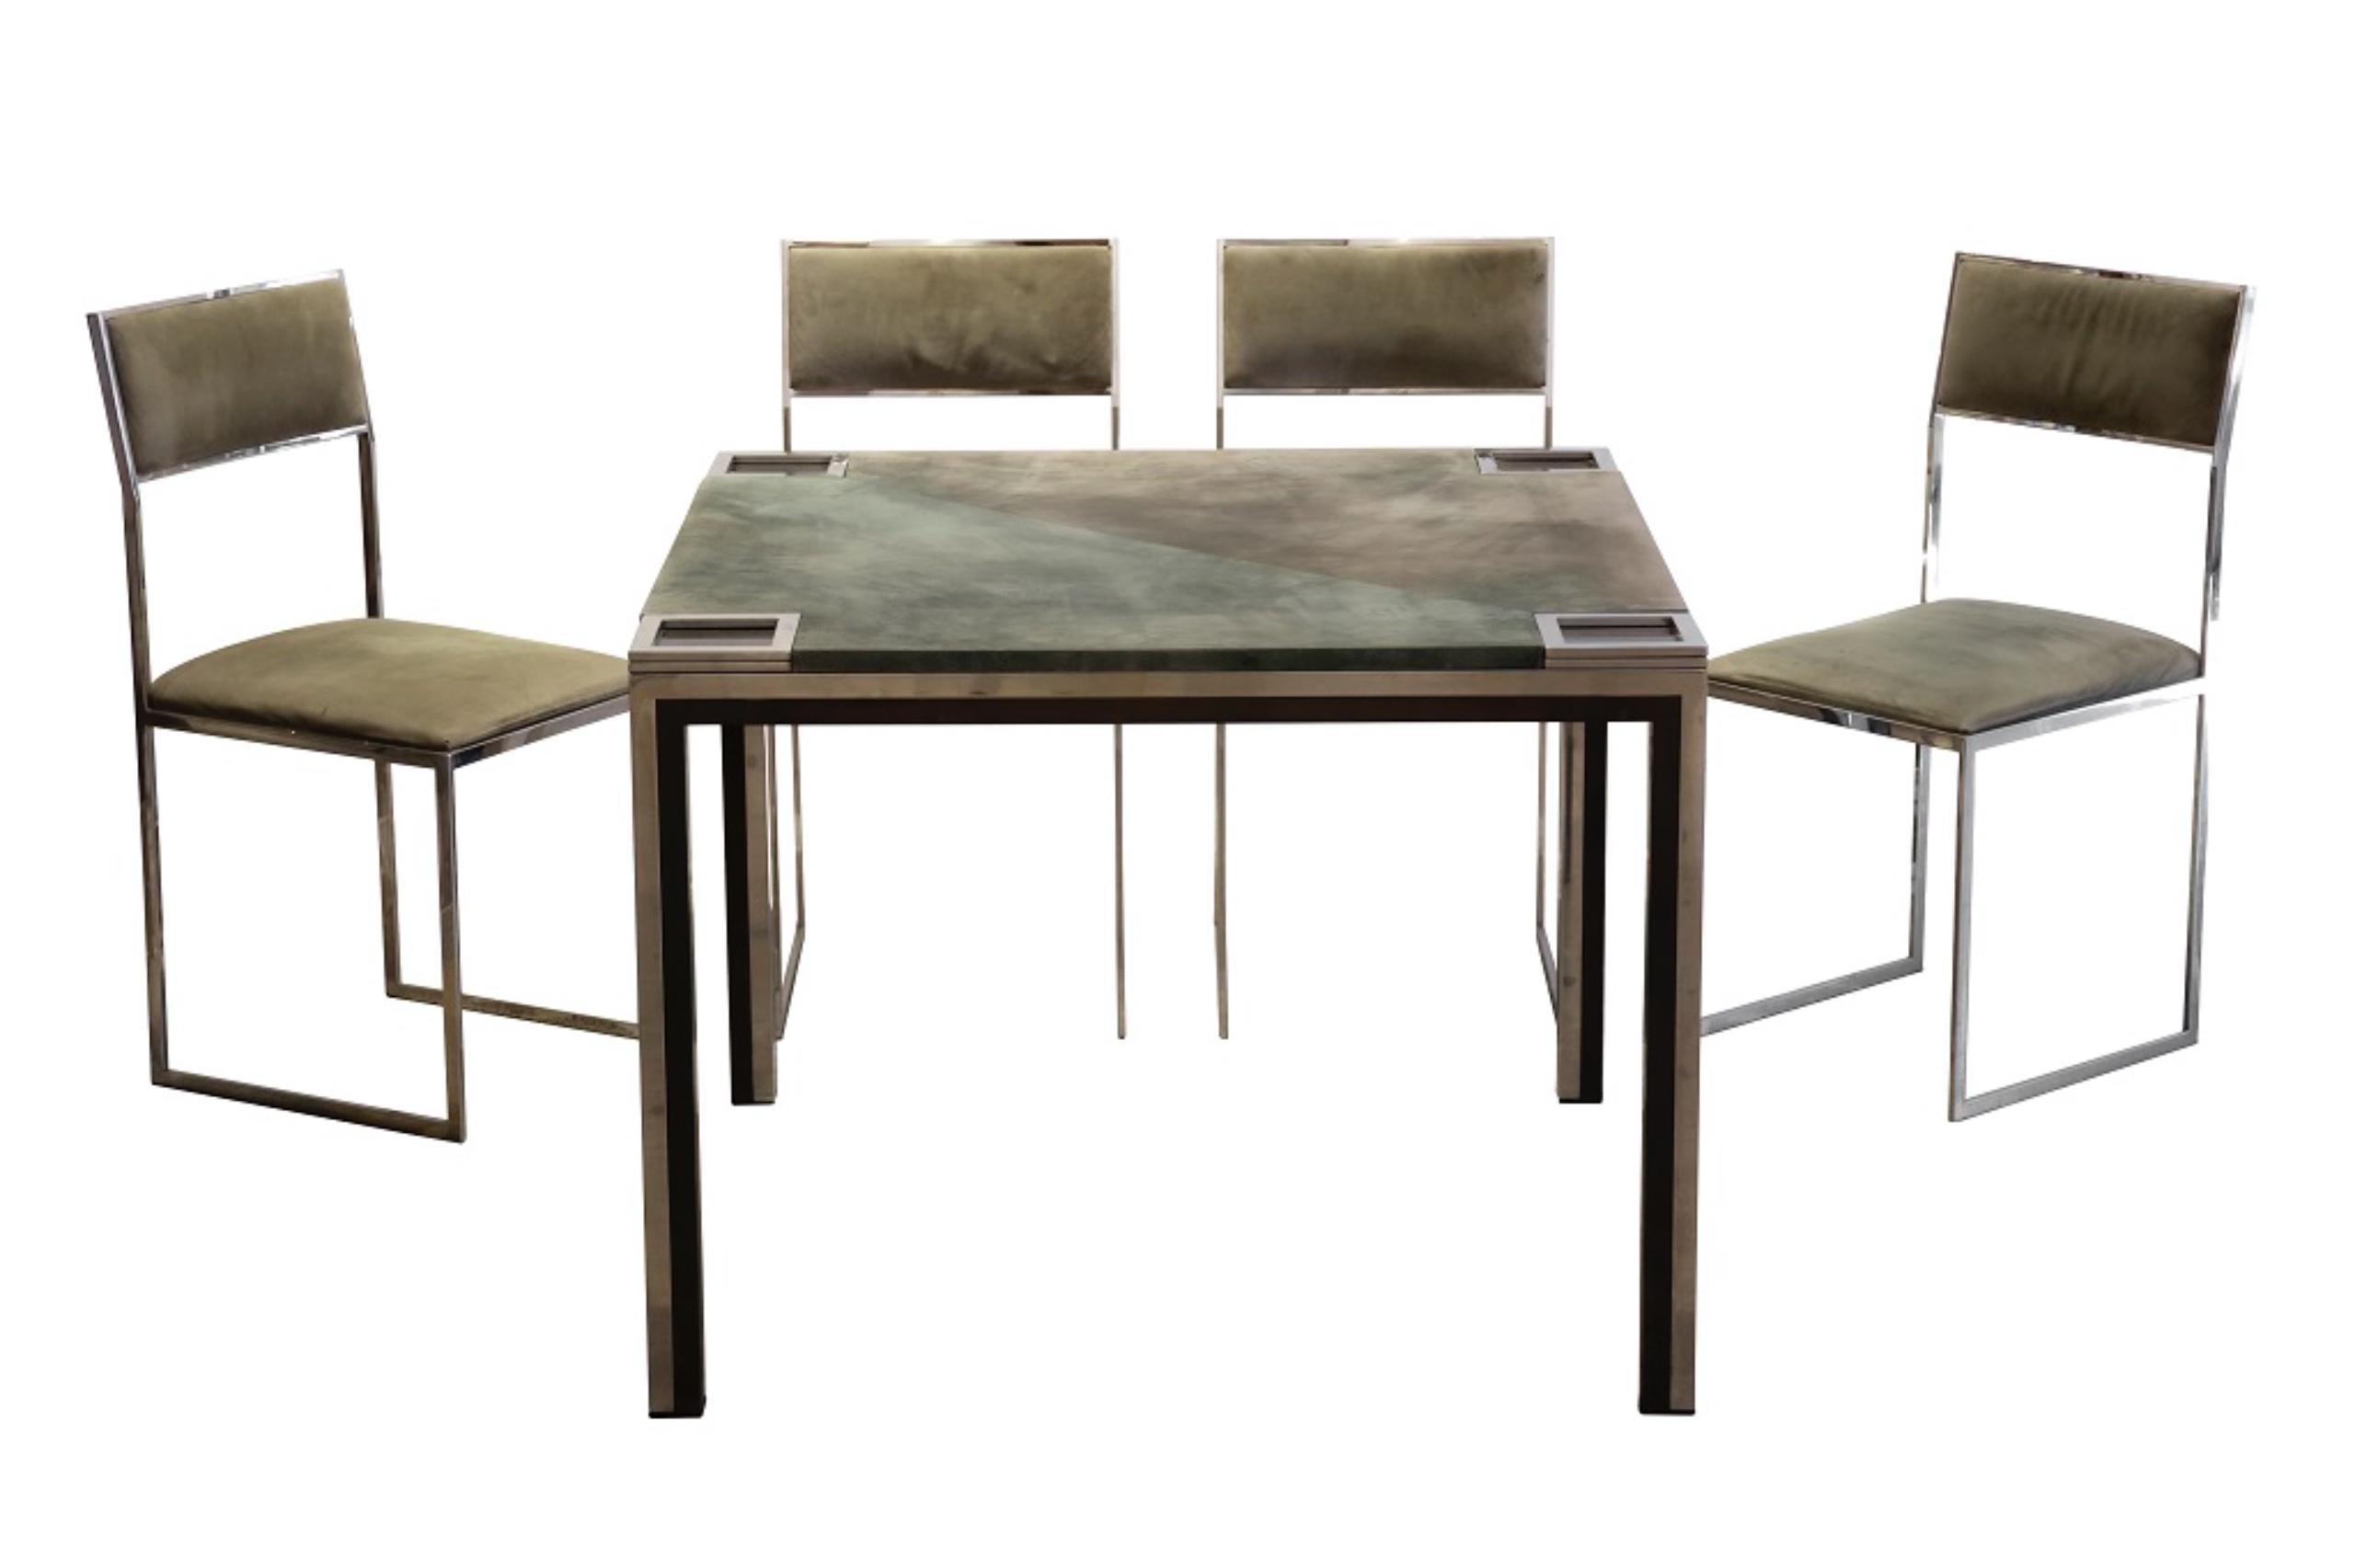 Play table with chairs is an original design work realized in the 1970s by Willy Rizzo (Naples, 1928 - Paris, 2013).

Created by Willy Rizzo.

The work includes a table and four chairs. 

Made in Italy.

Chamois and steel.

Dimensions: 76